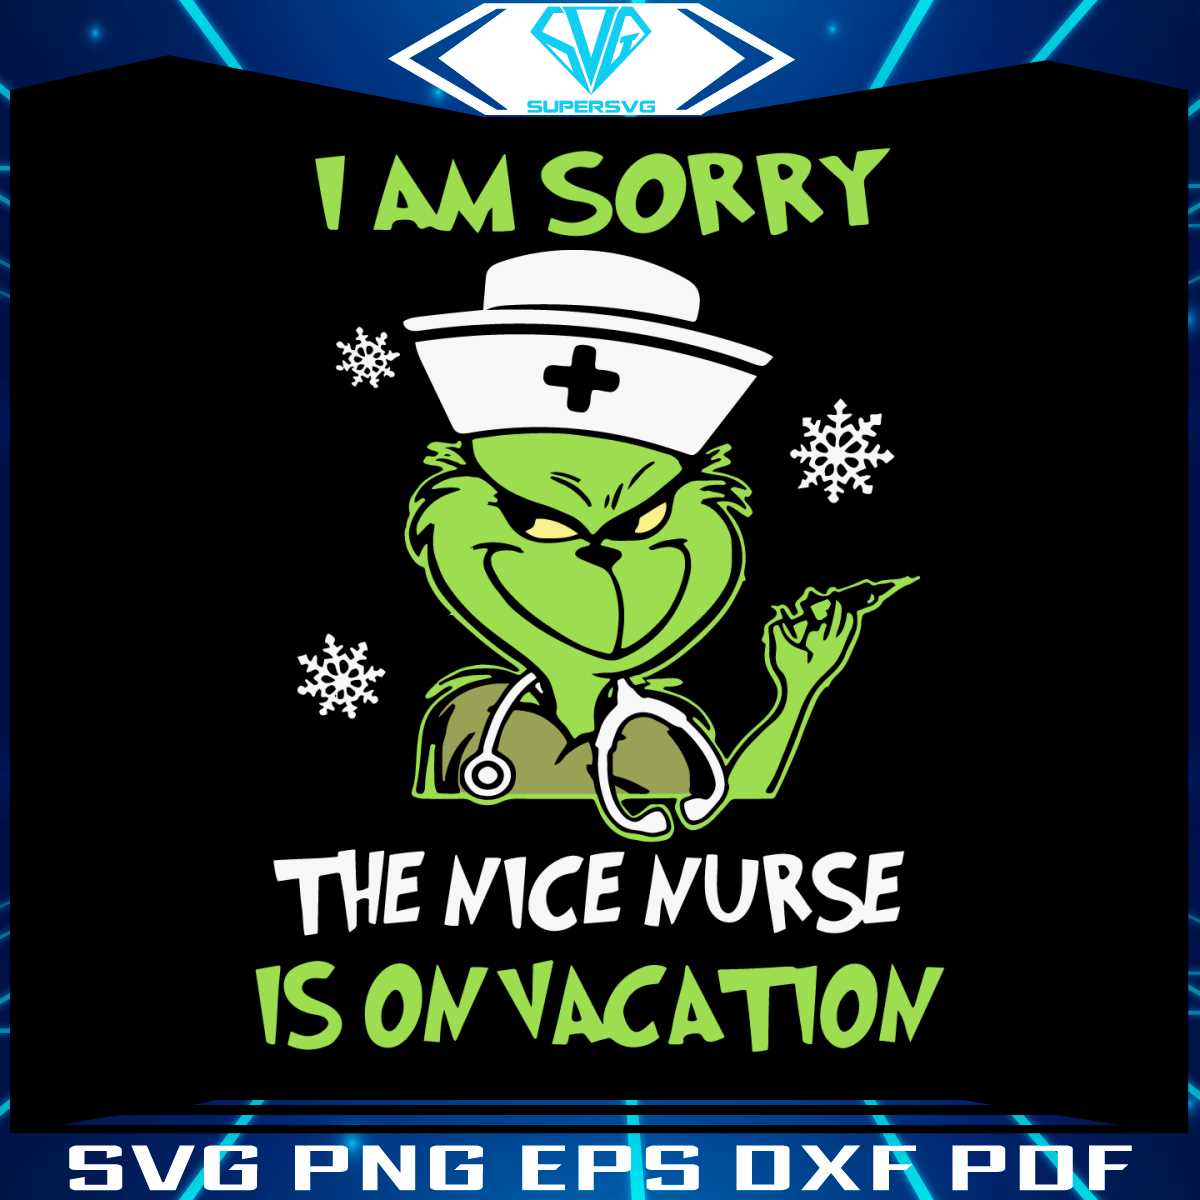 grinch-i-am-sorry-the-nice-nurse-is-on-vacation-svg-download